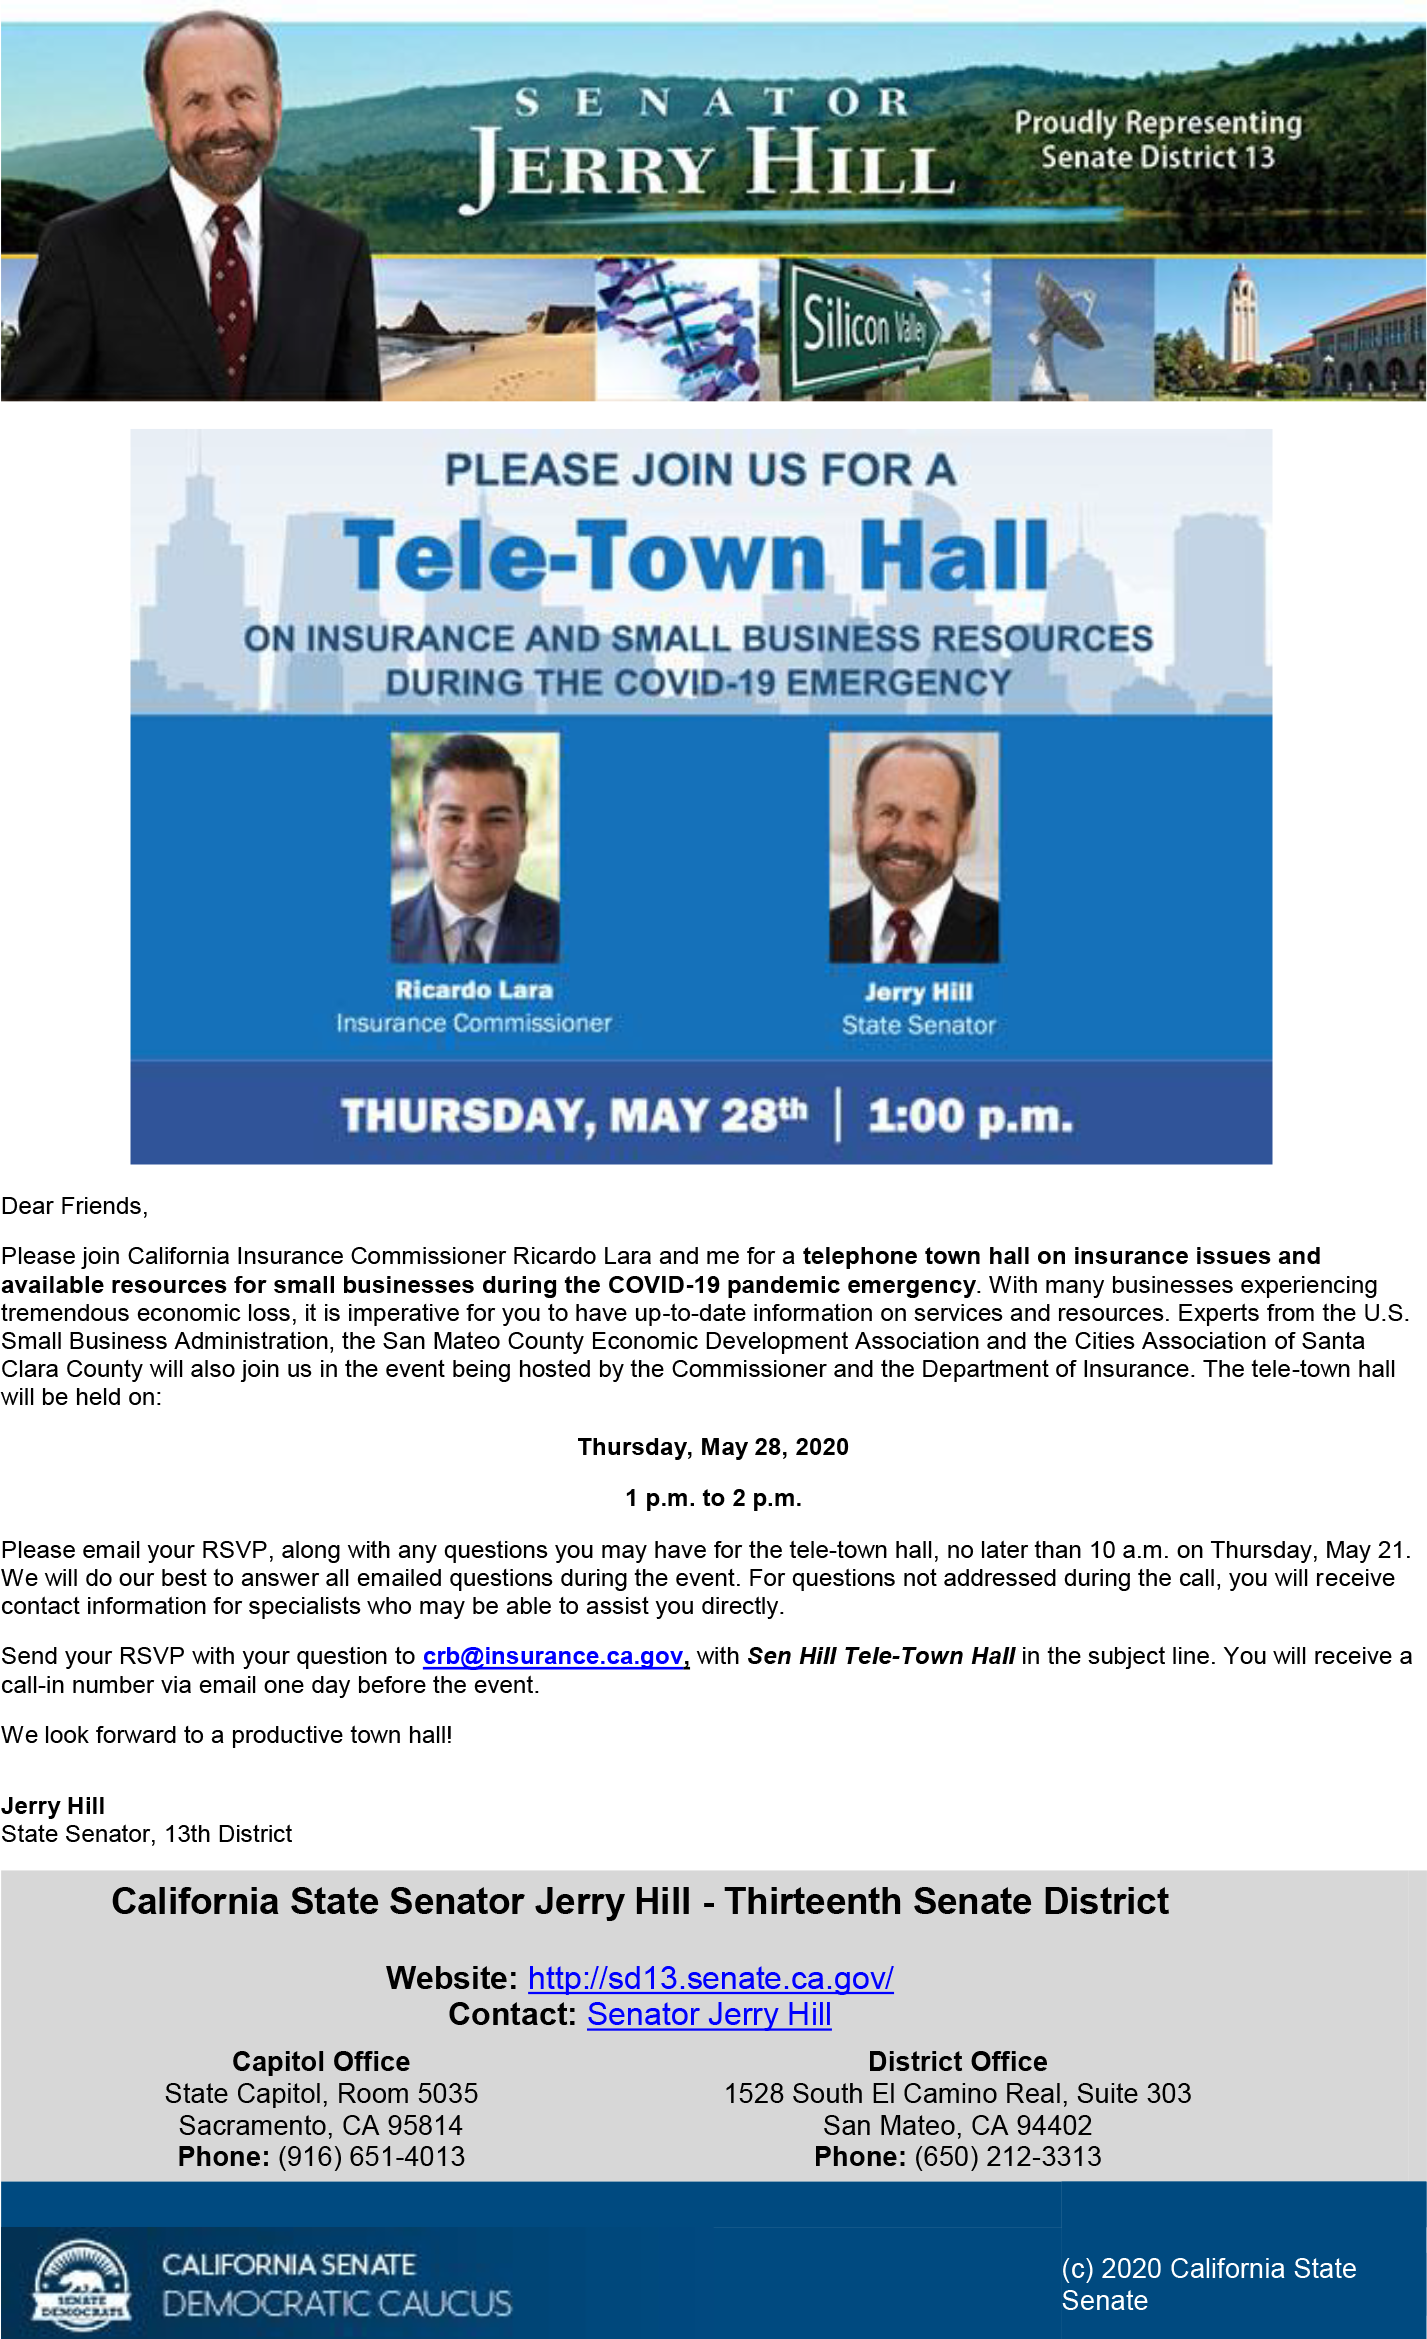 Flyer is an invitation from senator Jerry Hill to attend a teleconference on May 28th, 2020 at 1pm hosted by Commissioner Ricardo Lara